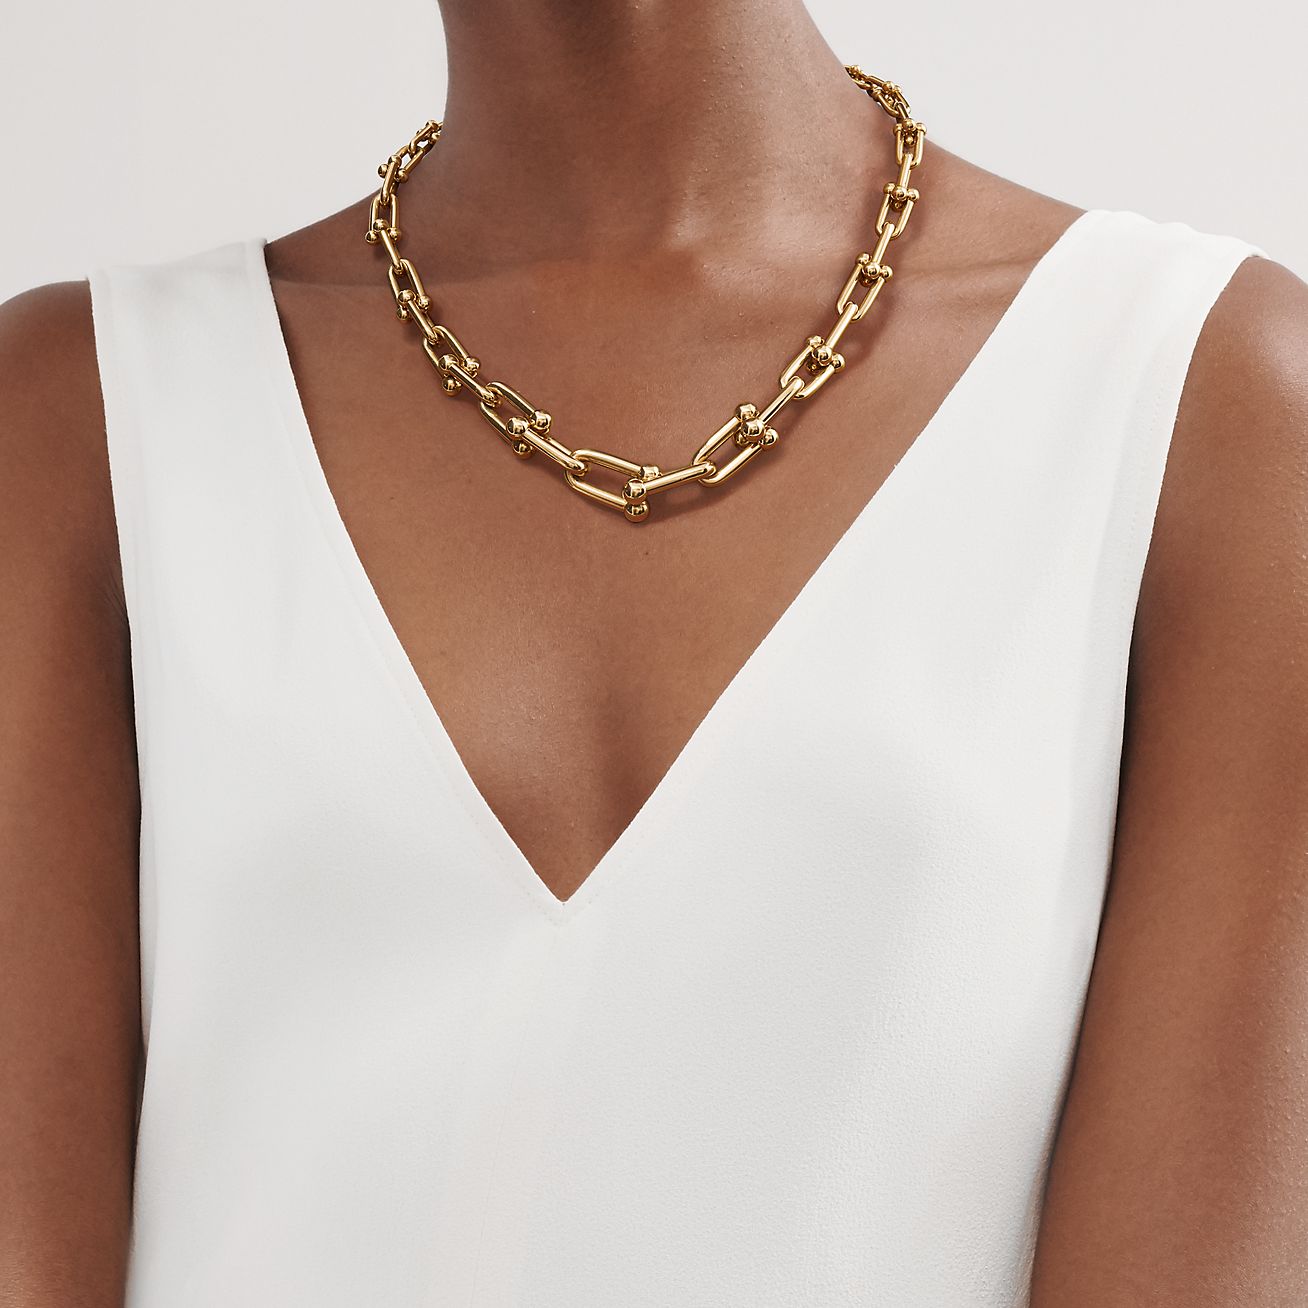 14k gold paperclip chain necklace with a lock